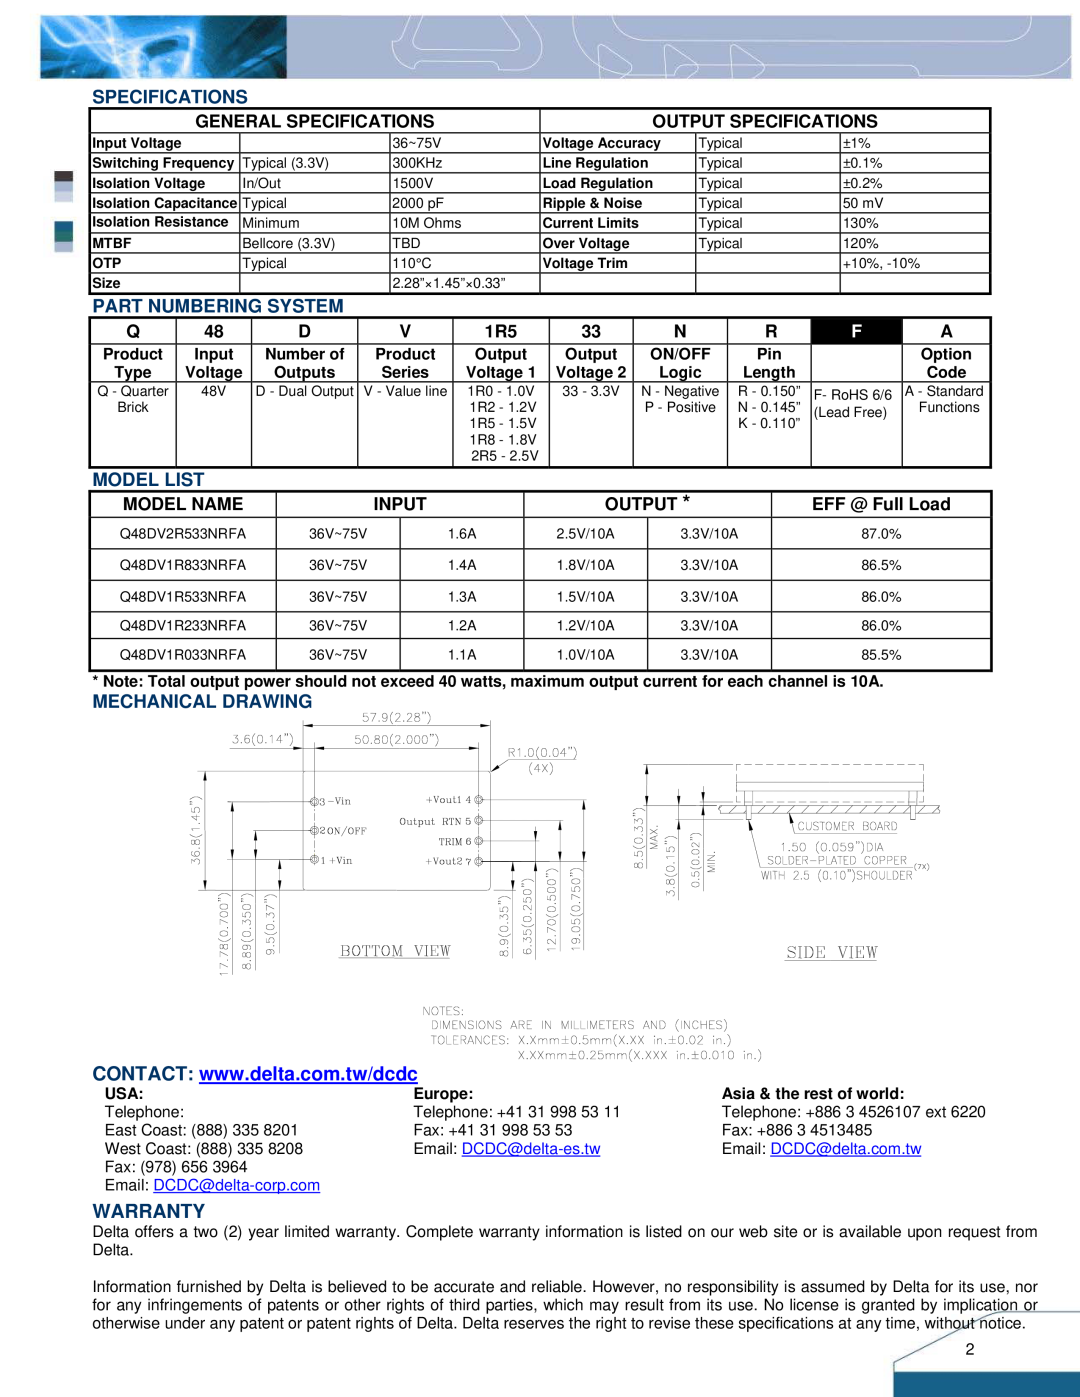 Delta Electronics Q48DV Warranty, System, Model List, Mechanical Drawing, General Specifications, Model Name, Input 